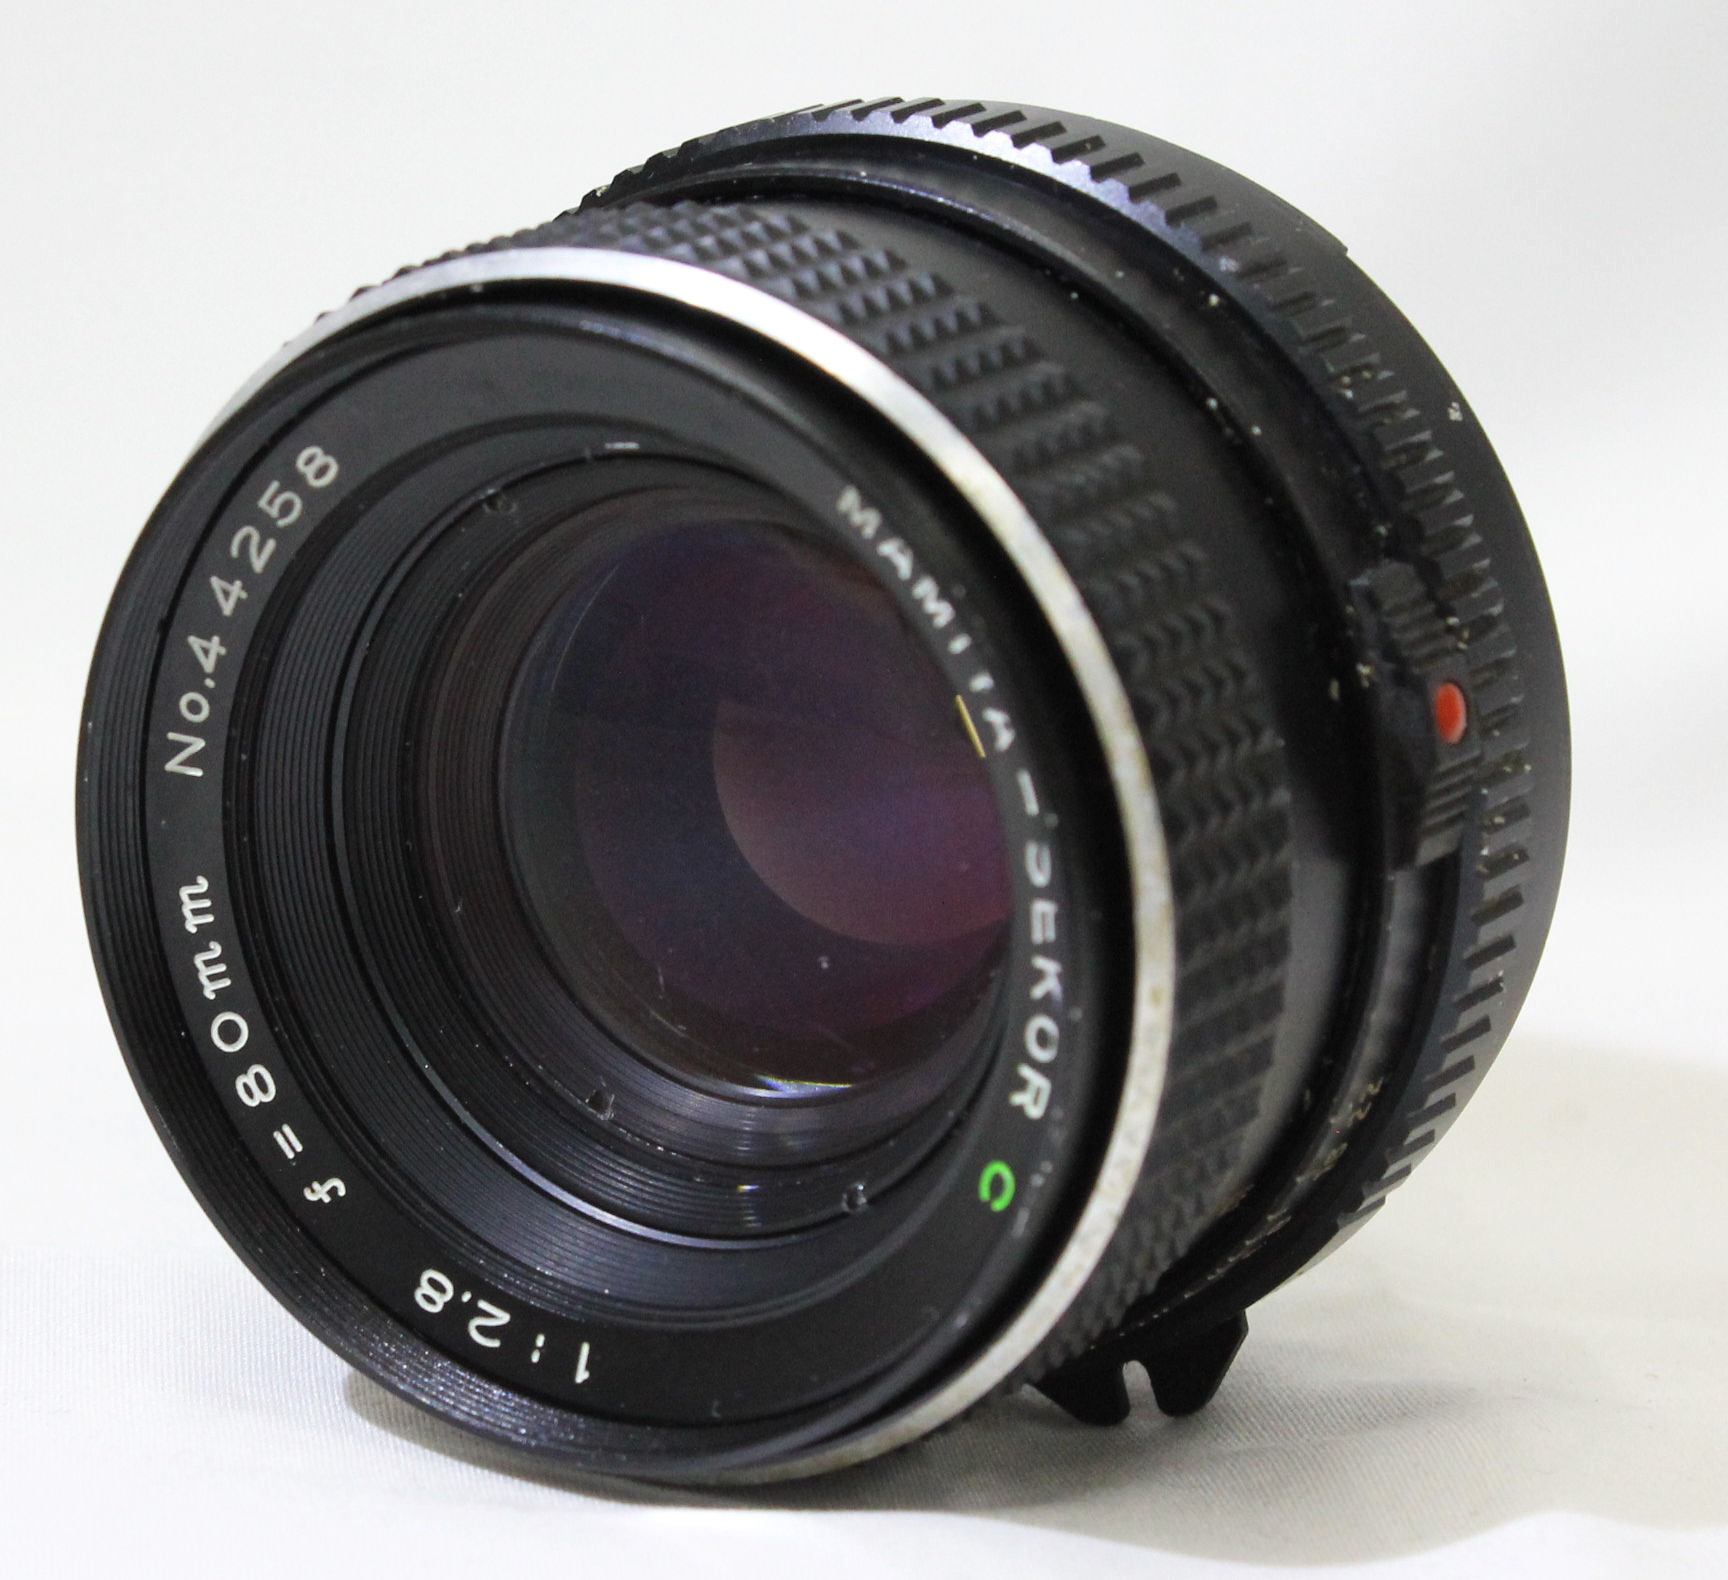 Japan Used Camera Shop | [Excellent] Mamiya Sekor C 80mm F/2.8 MF Lens for M645 1000S 645 Super Pro TL from Japan 